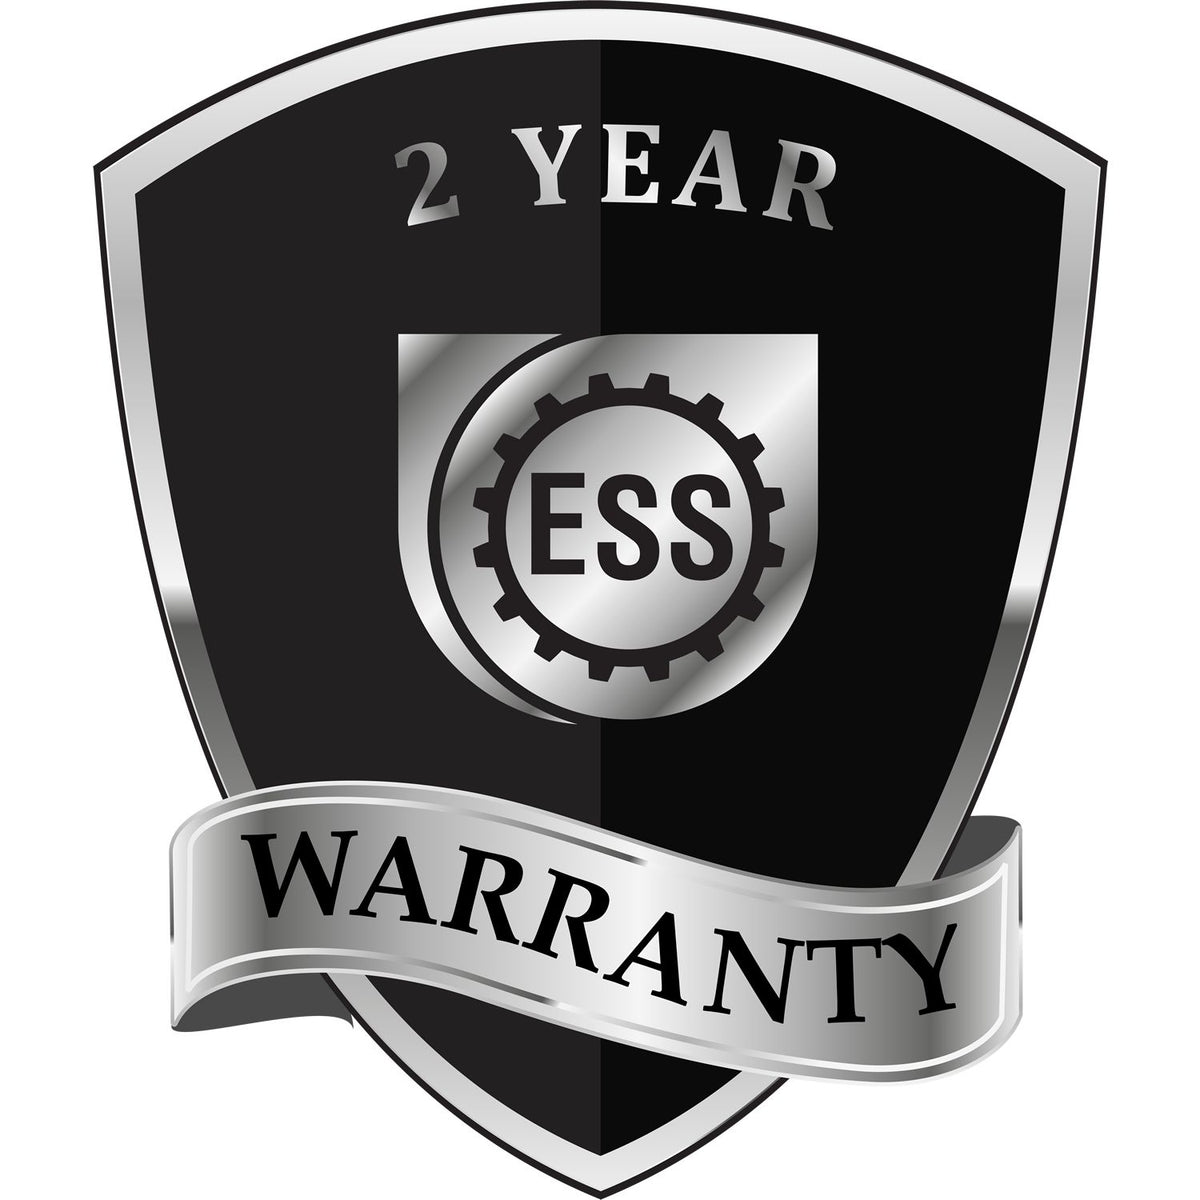 A badge or emblem showing a warranty icon for the North Dakota Engineer Desk Seal